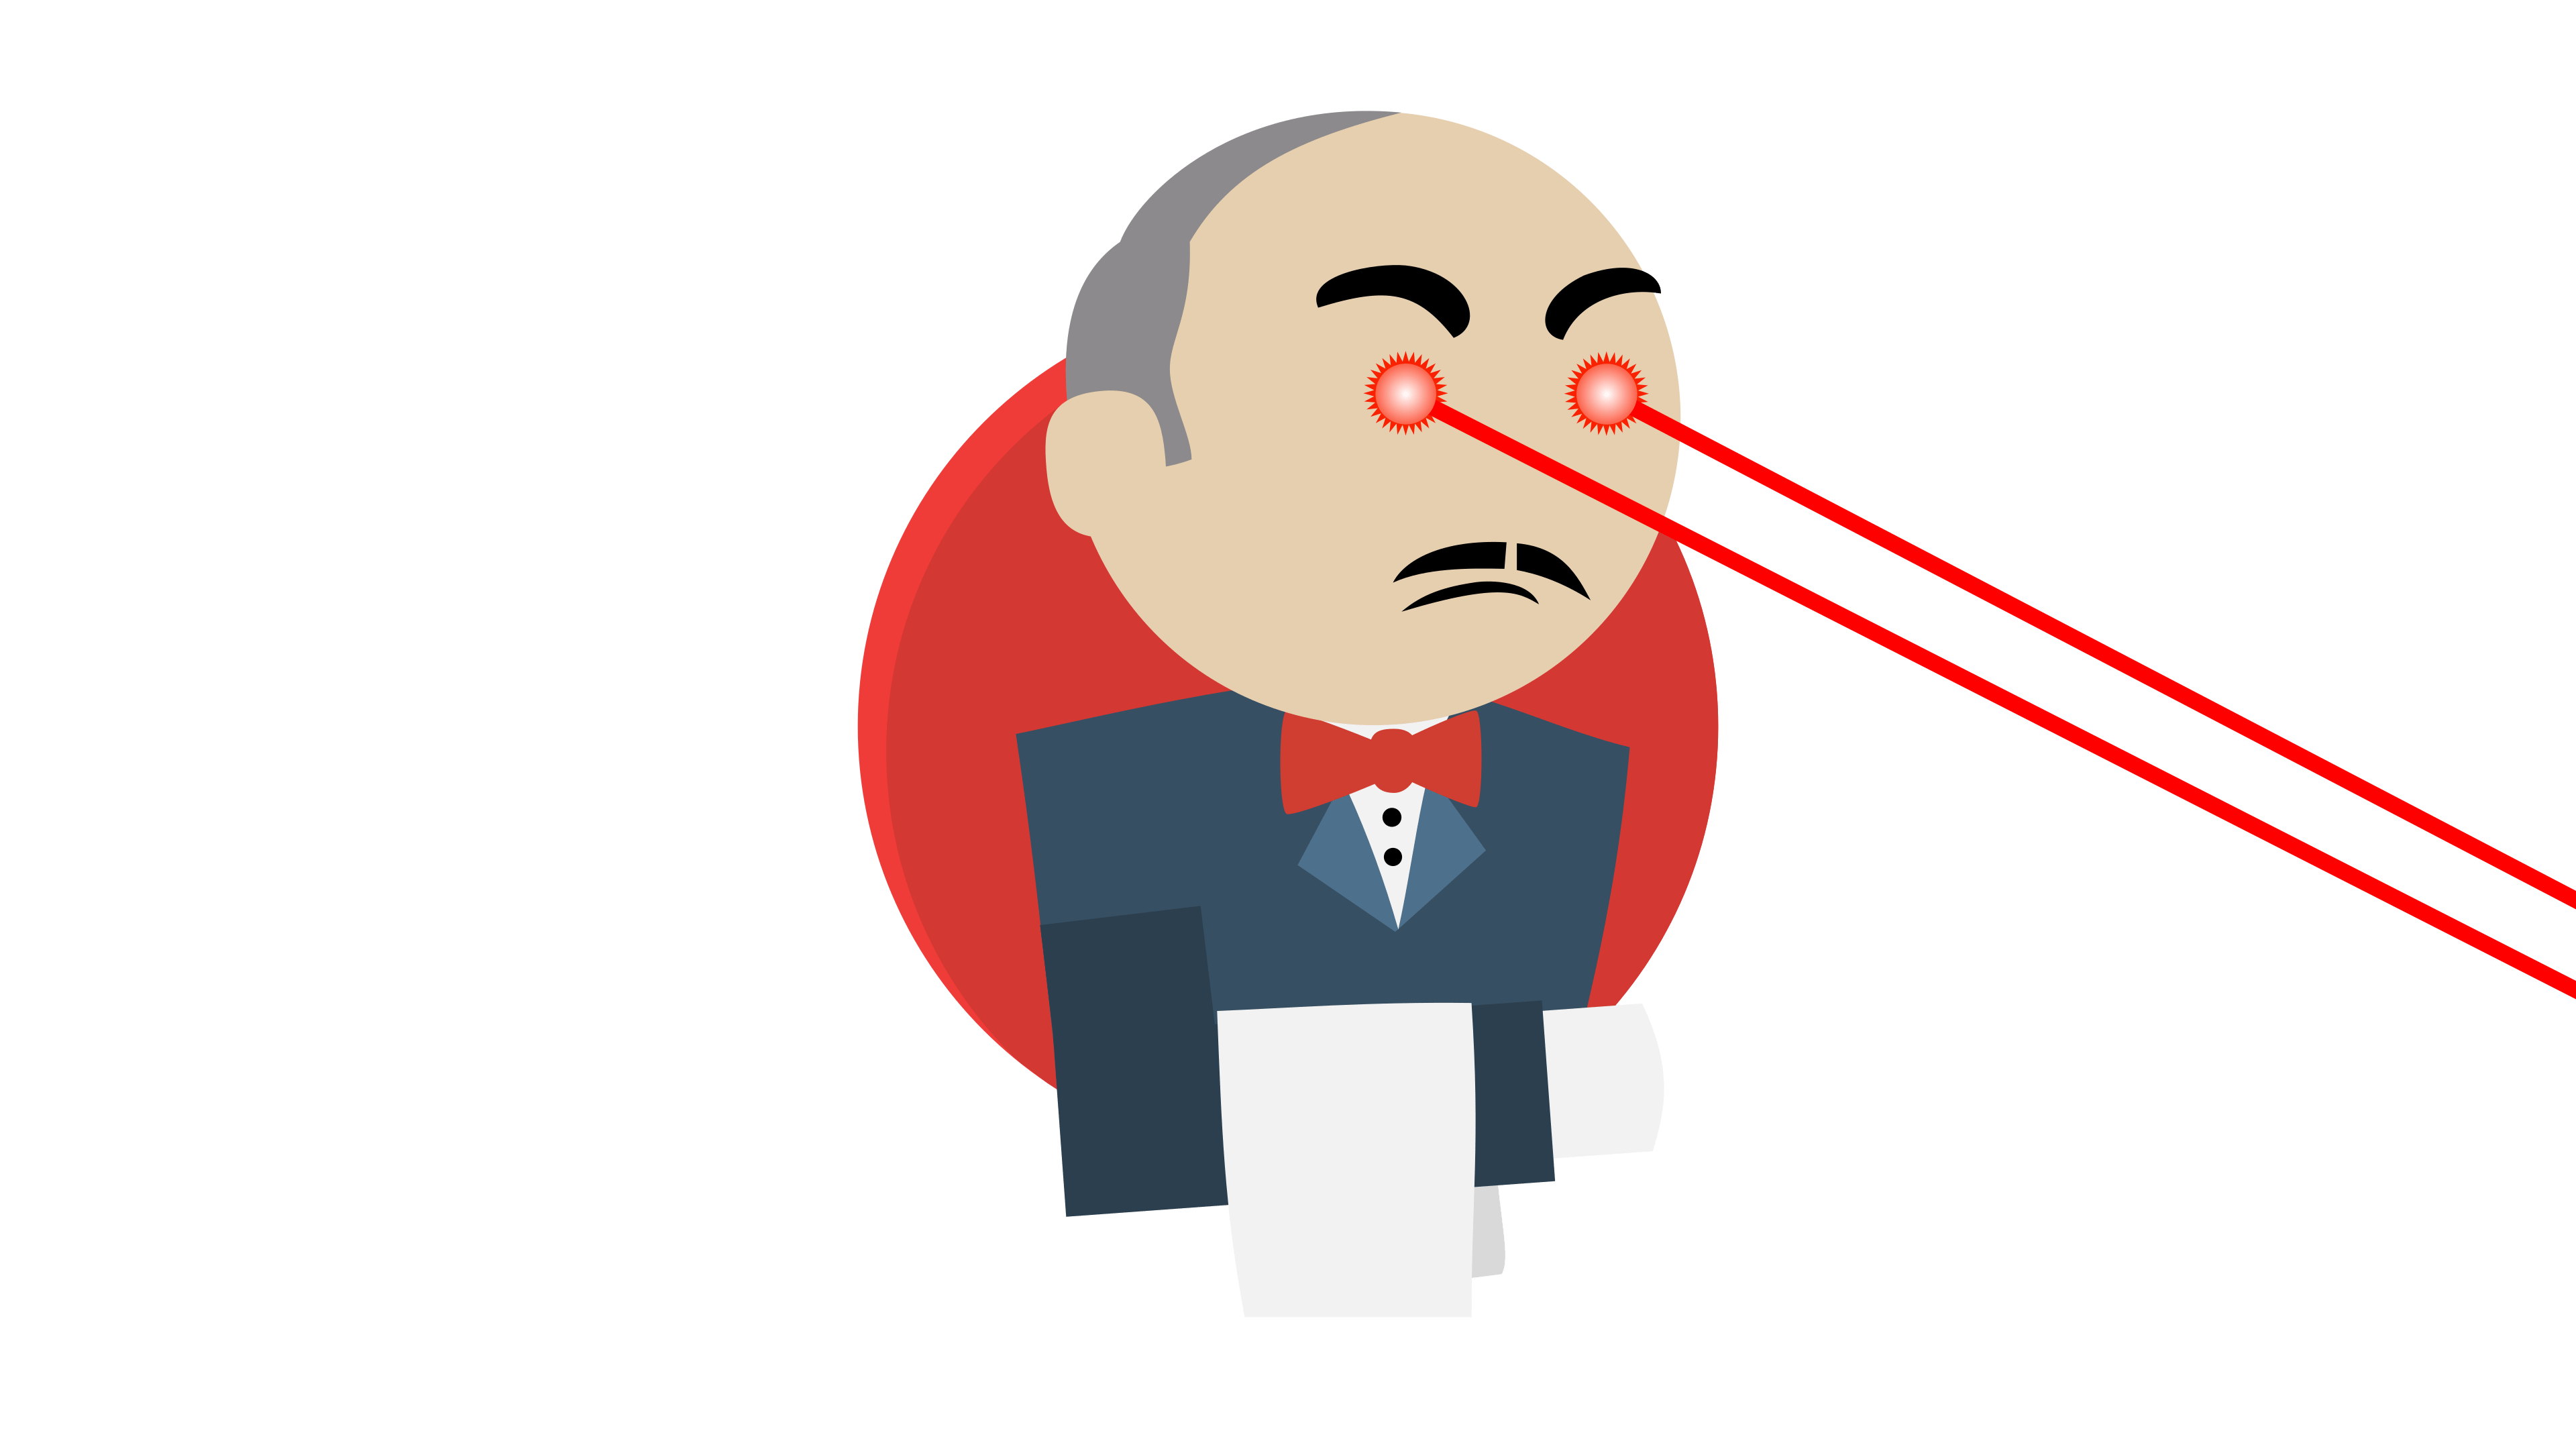 Pissed off Jenkins with laser eyes